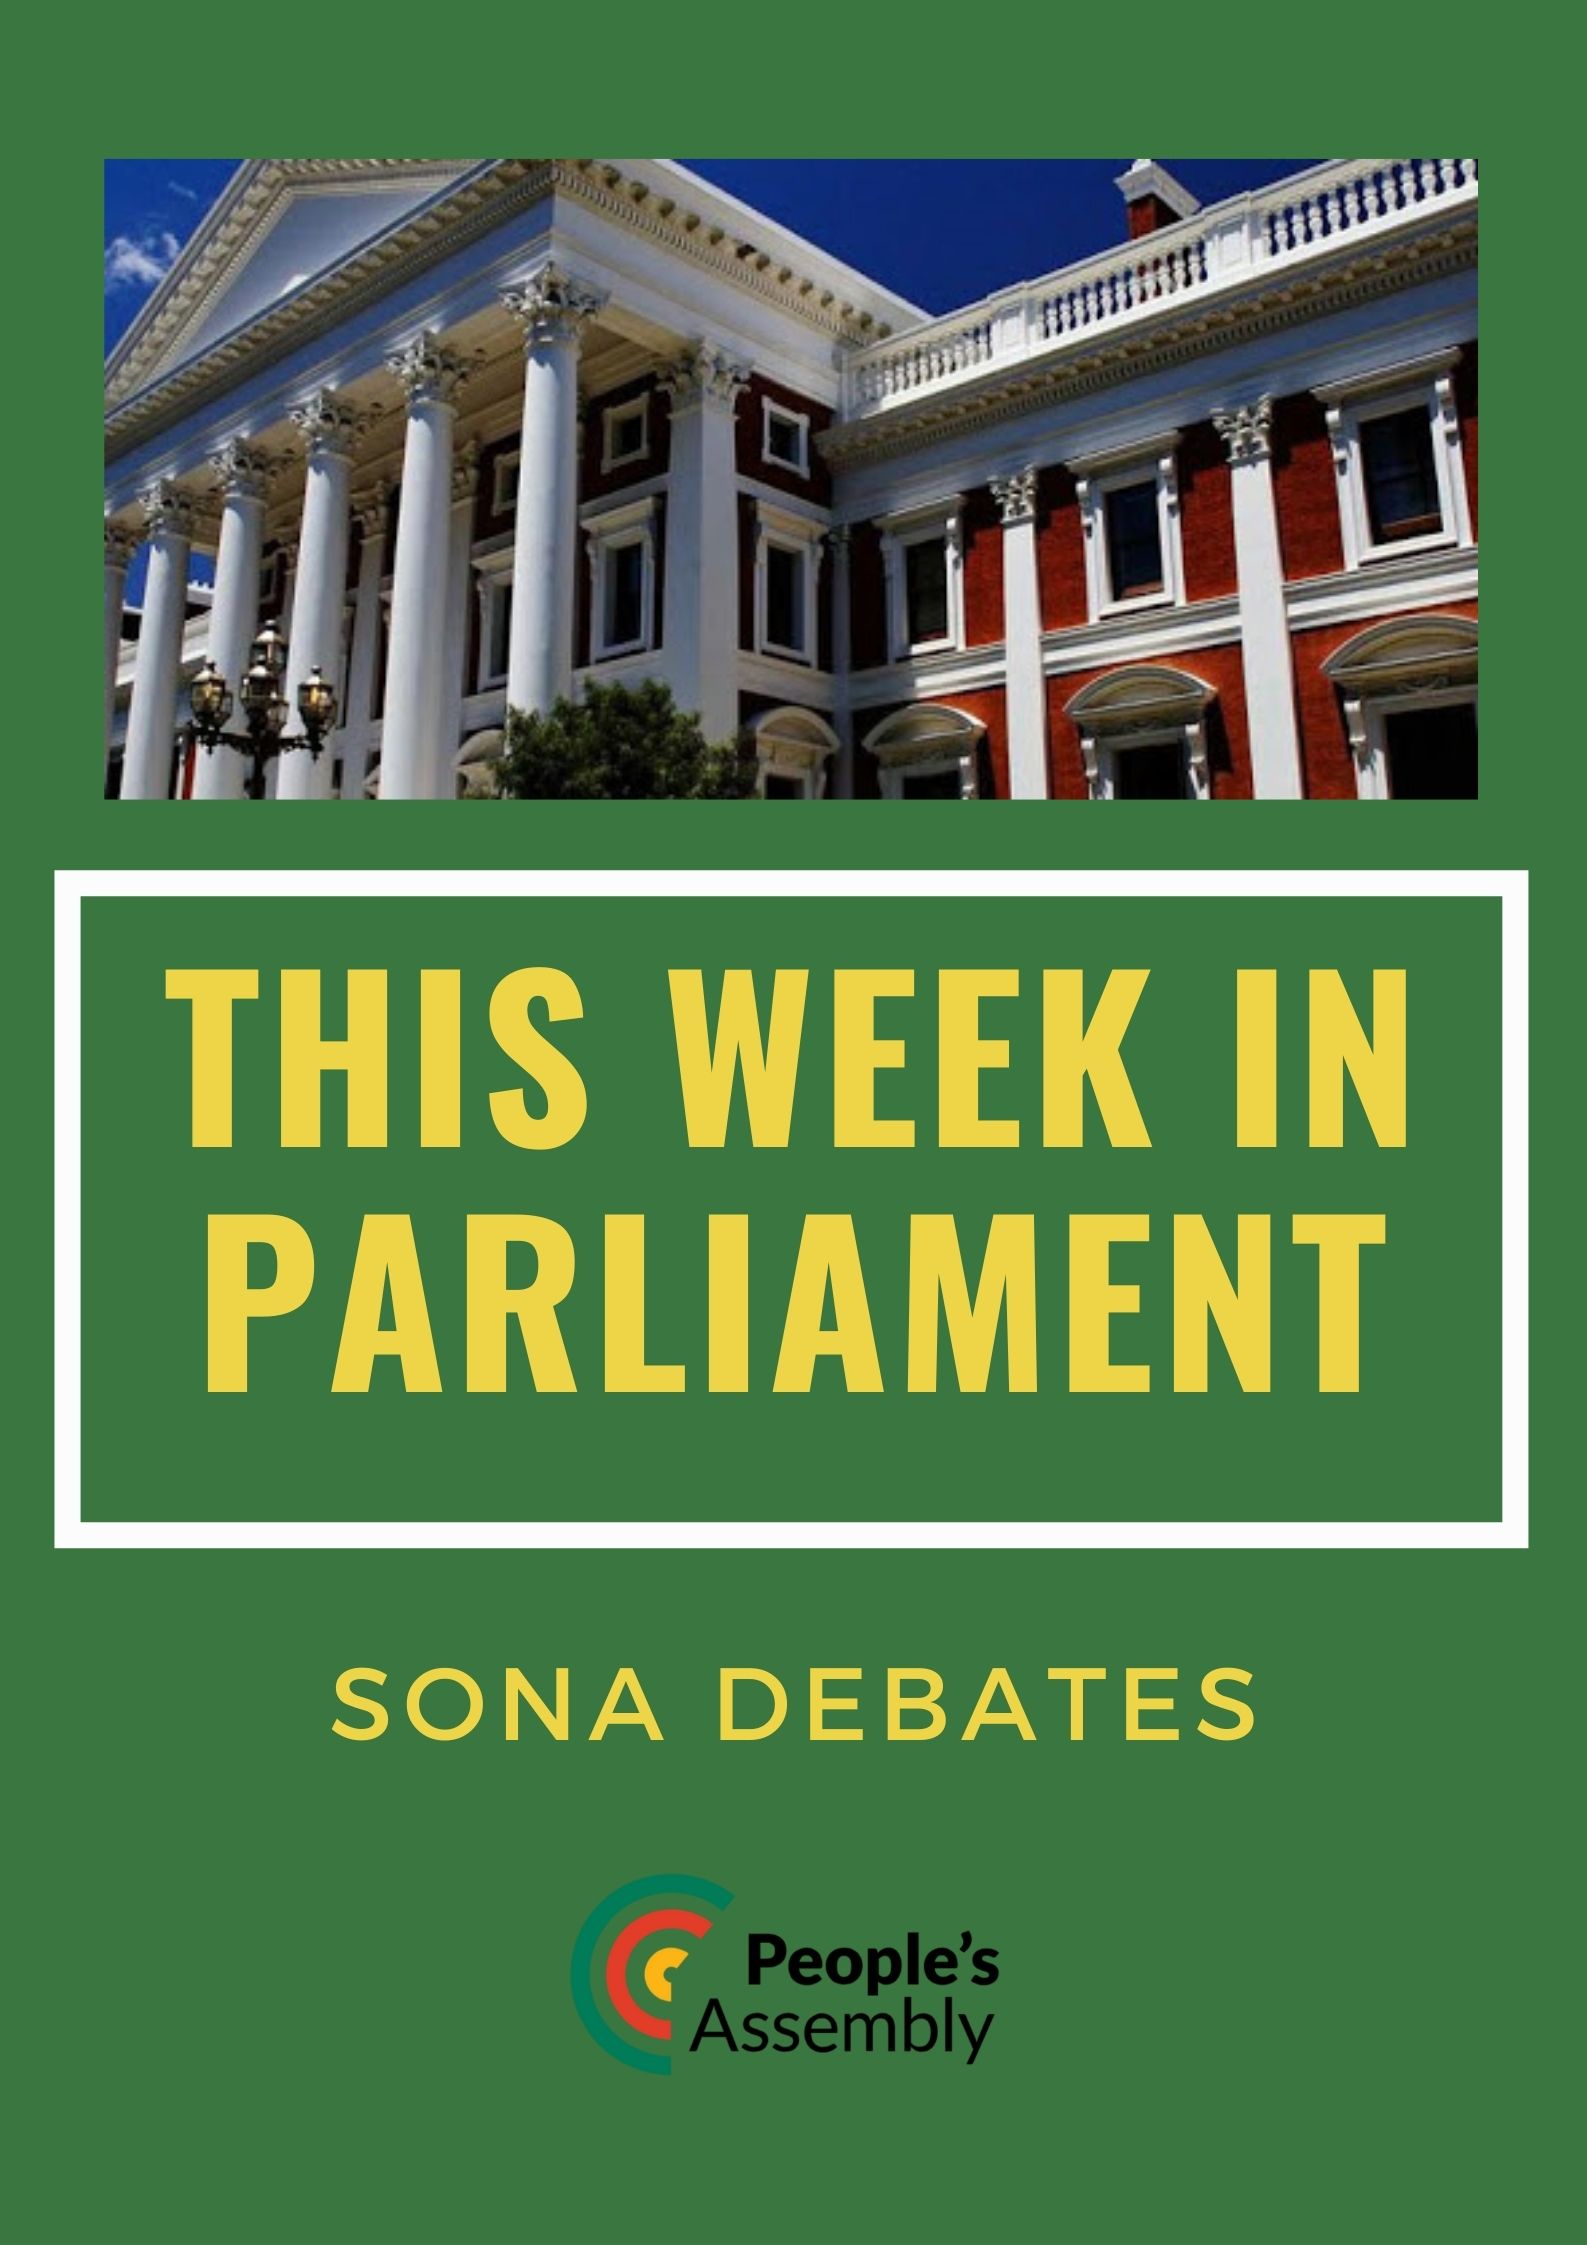 https://www.pa.org.za/media_root/file_archive/this_week_in_parliament3.jpg